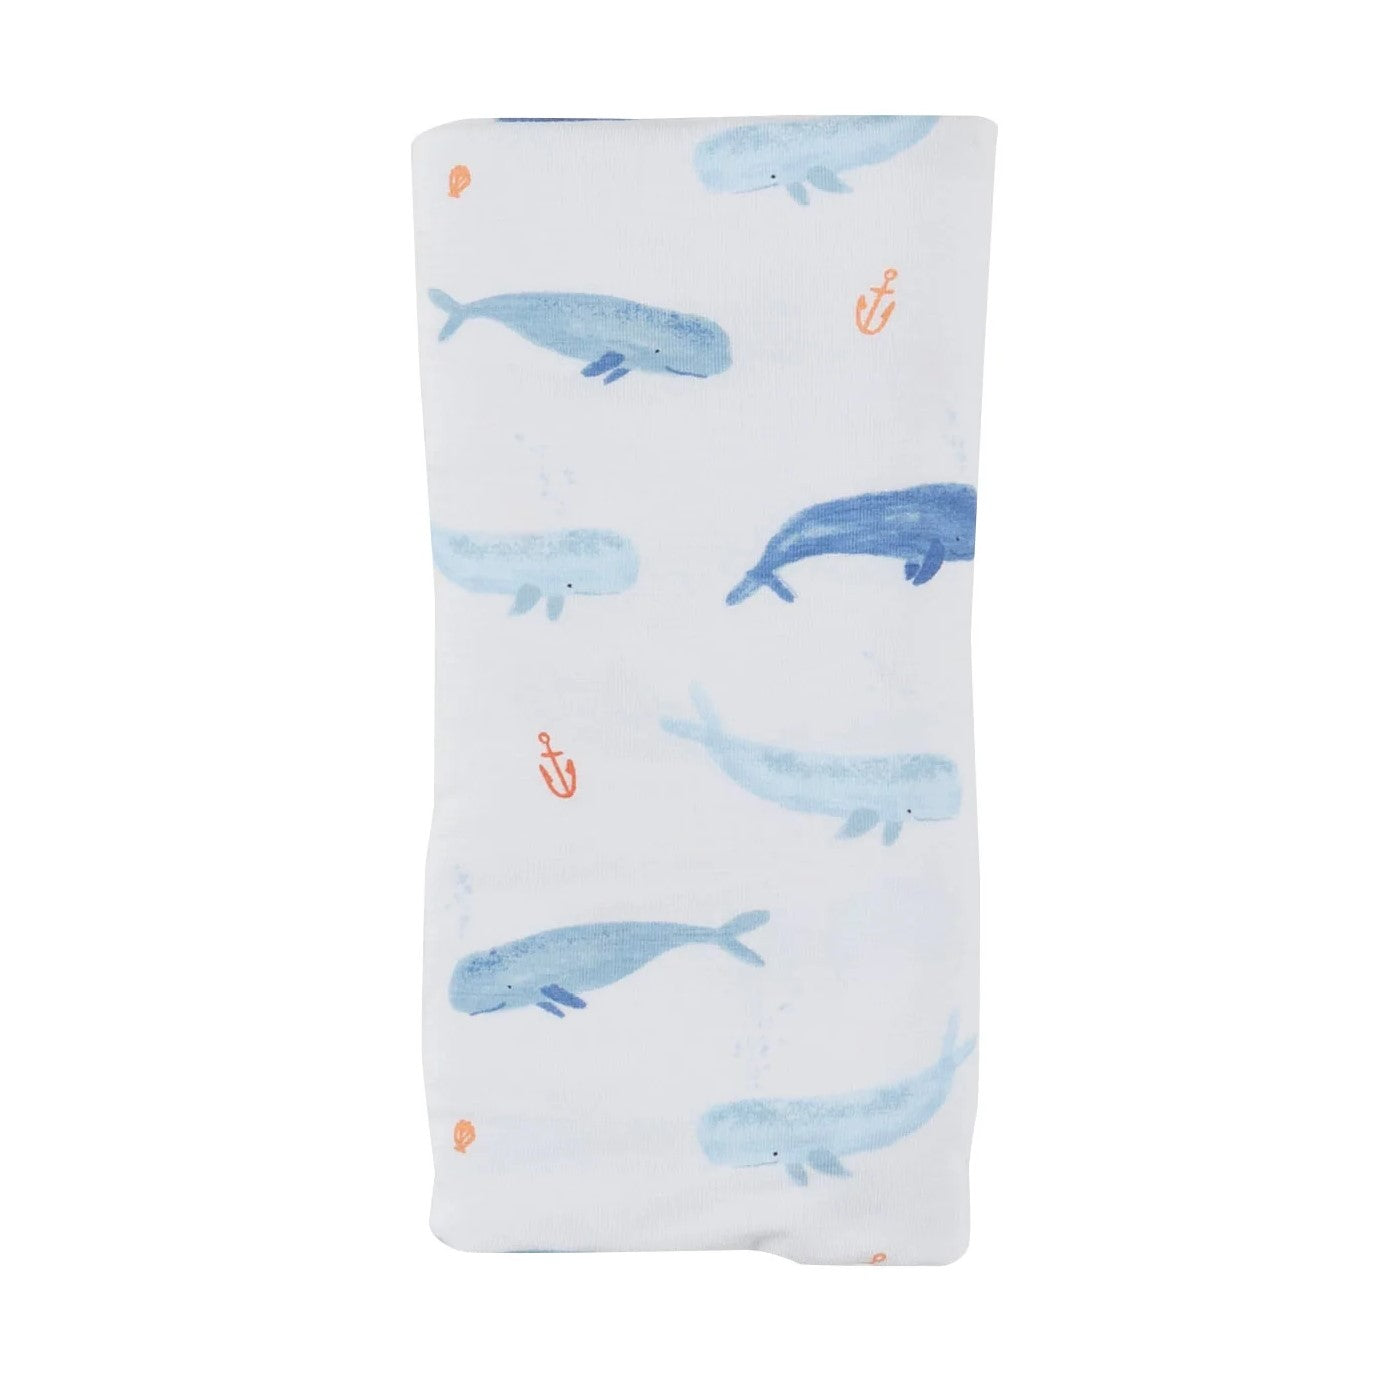 Whale Hello There Swaddle Blanket